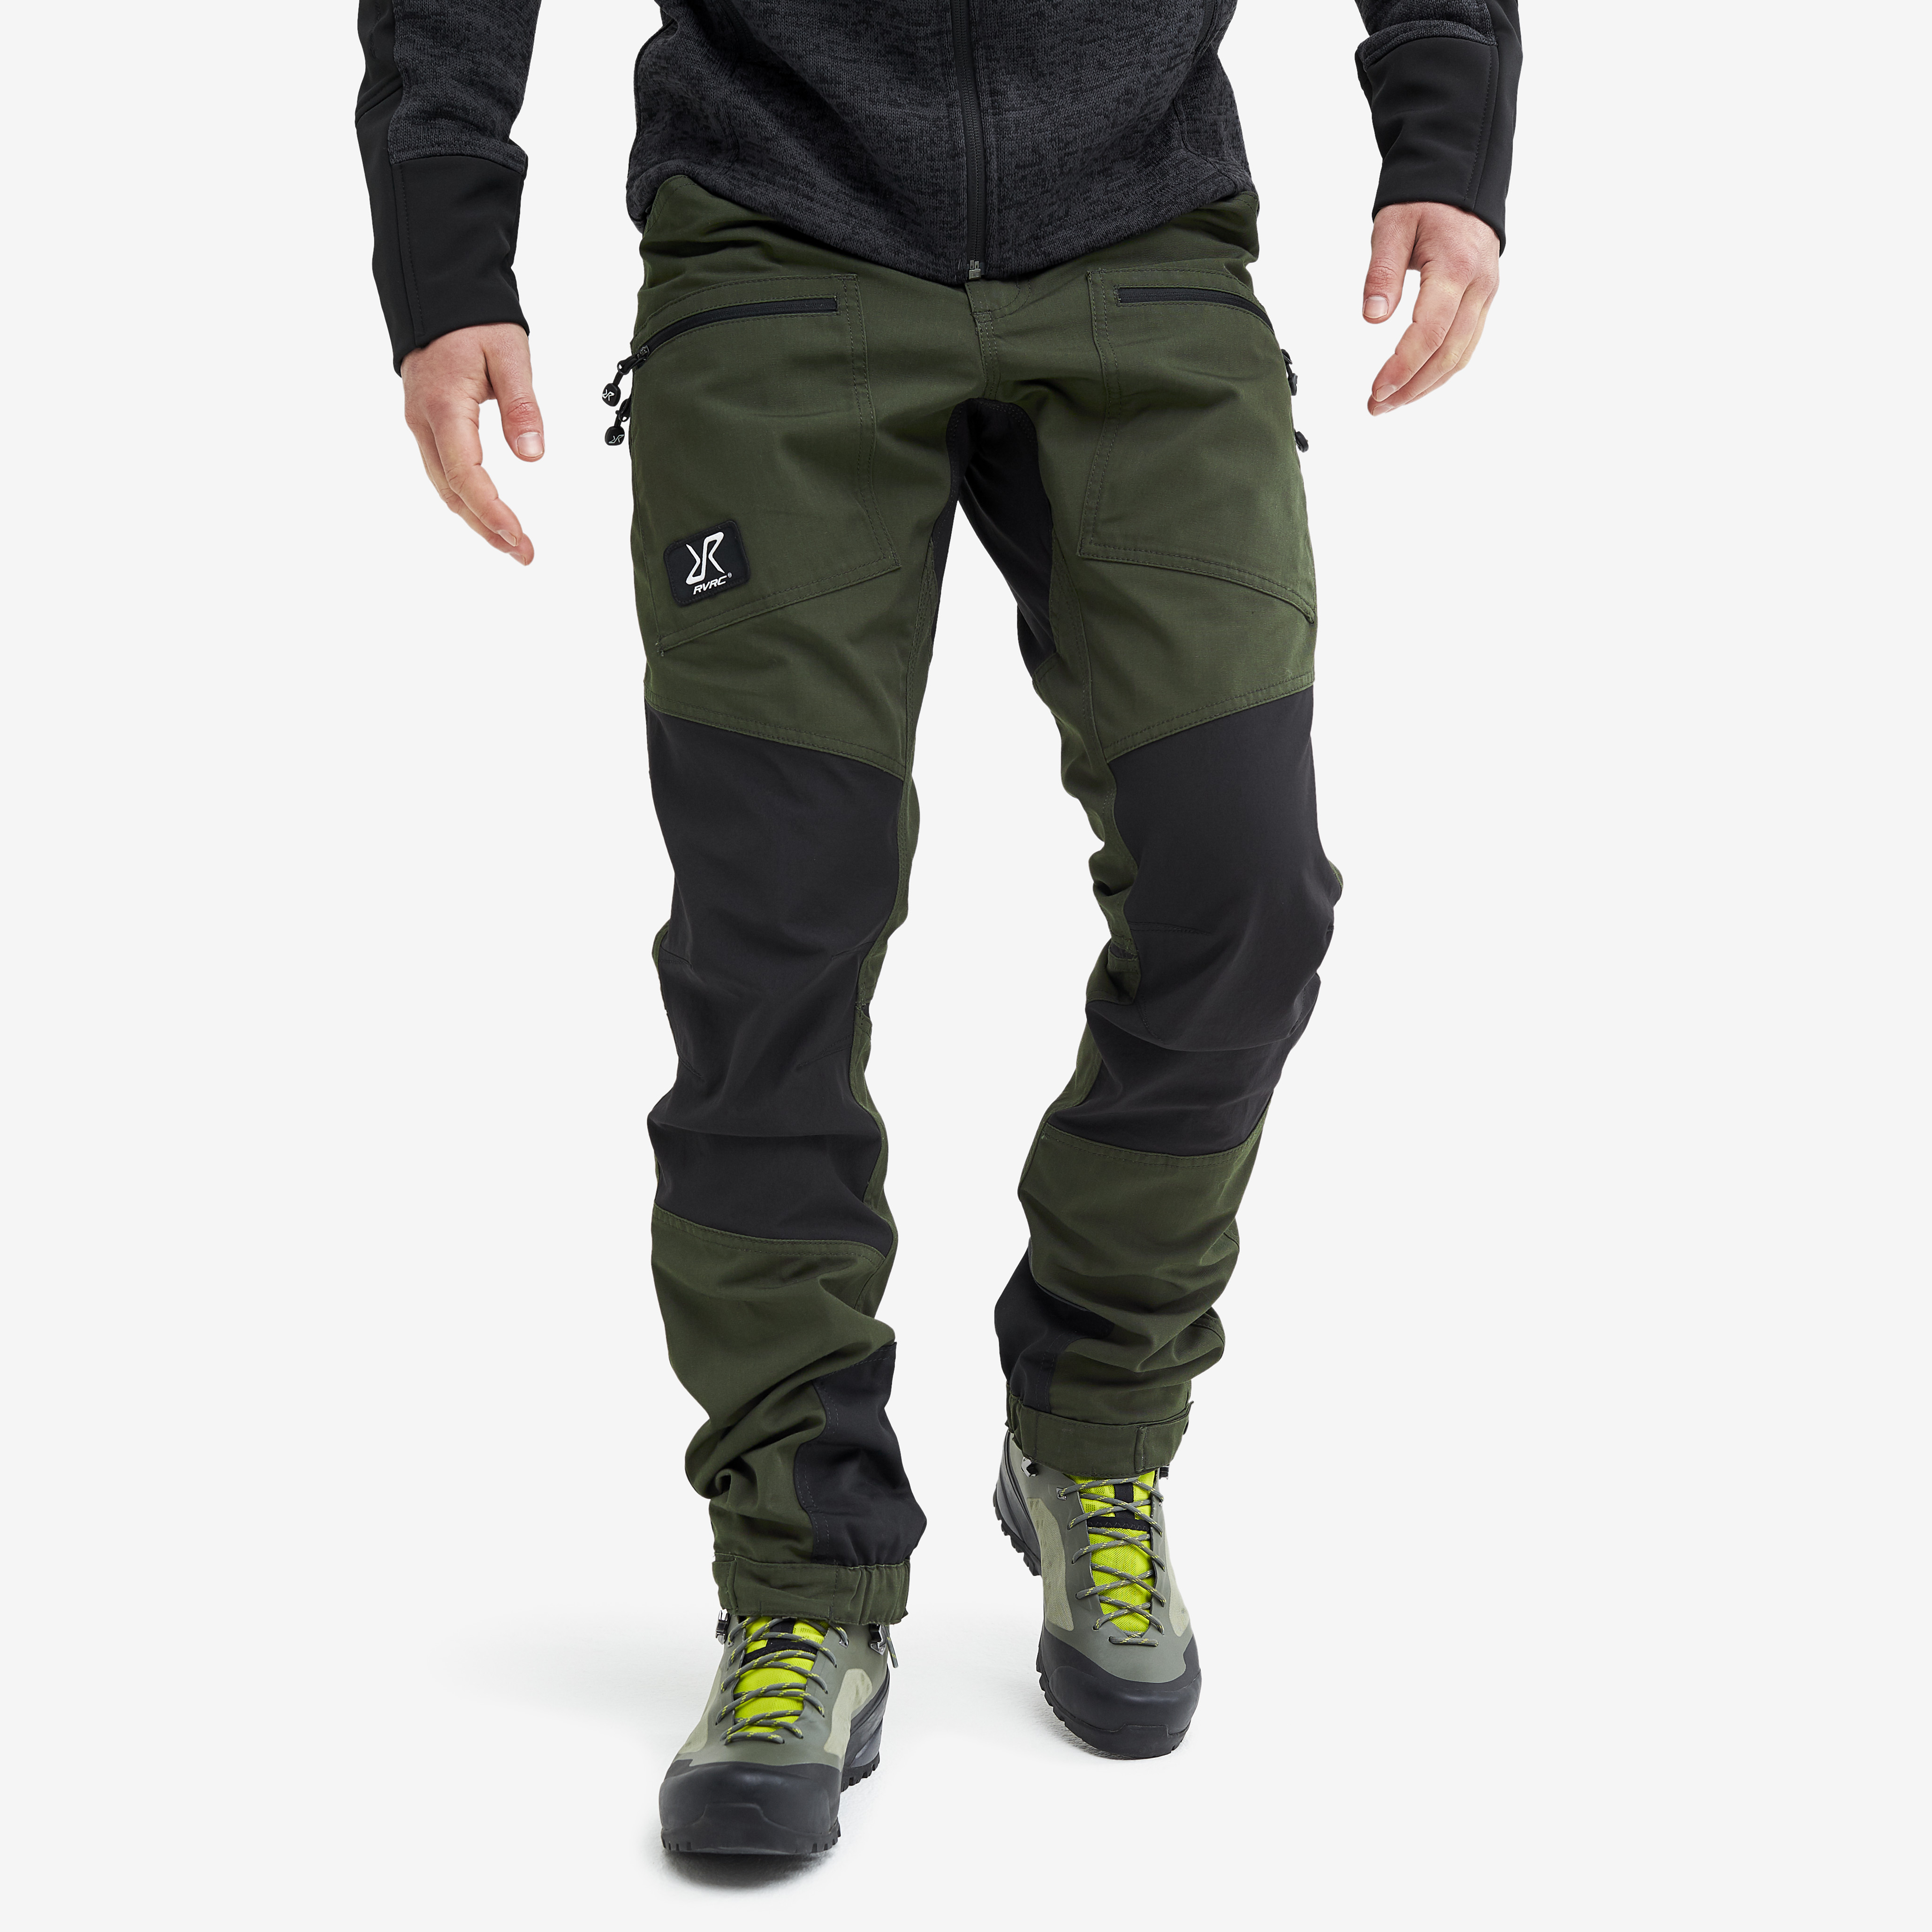 Nordwand Pro hiking pants for men in green